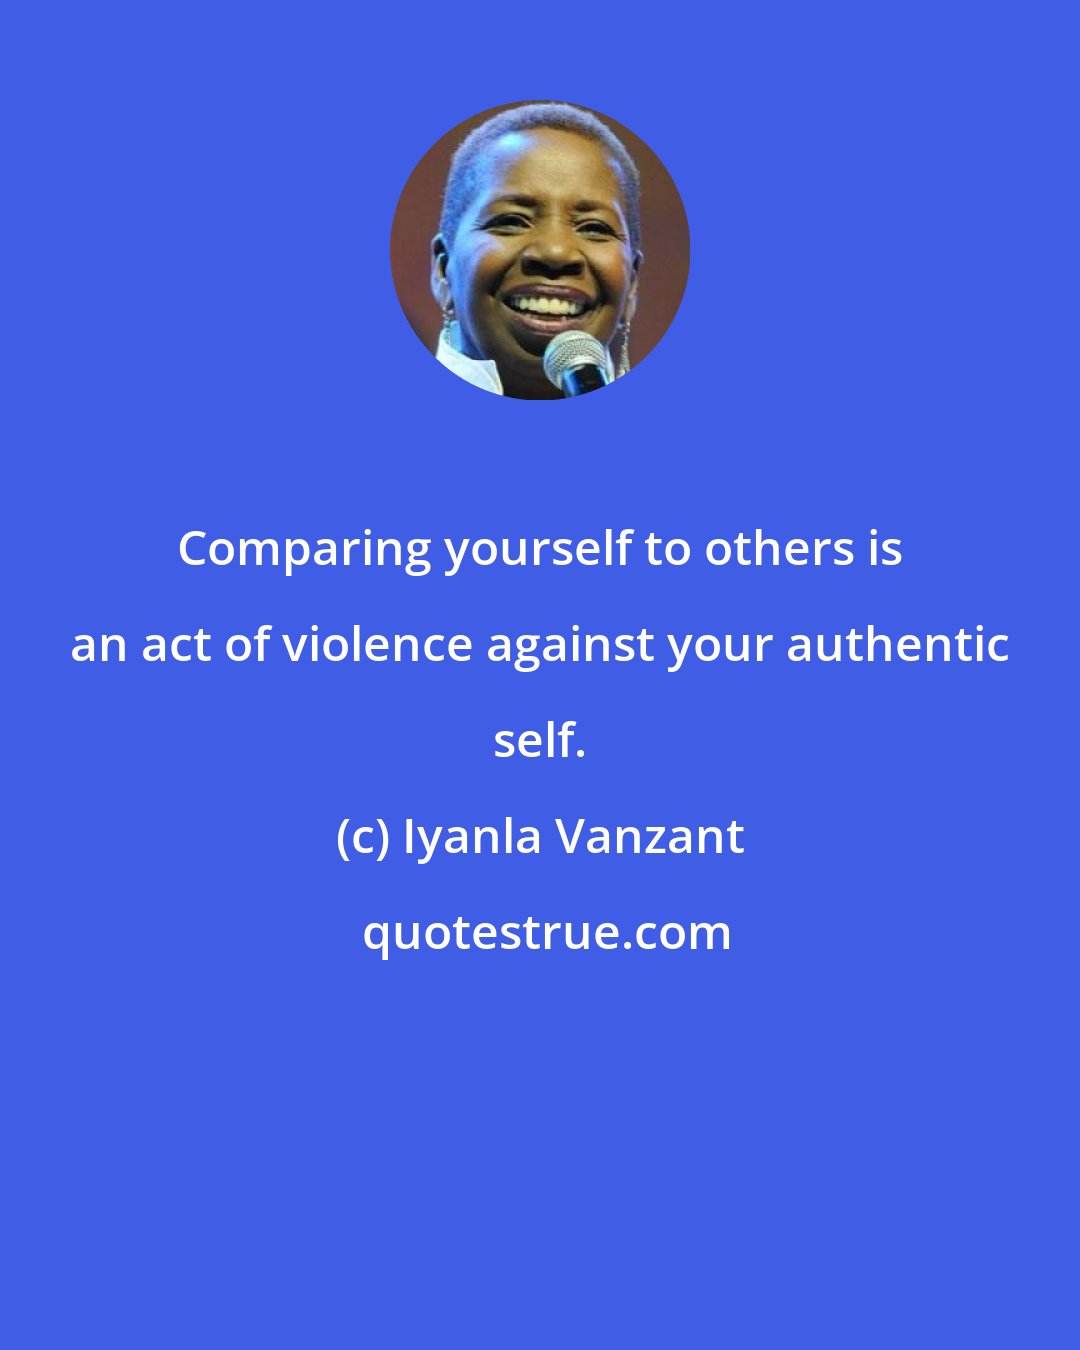 Iyanla Vanzant: Comparing yourself to others is an act of violence against your authentic self.